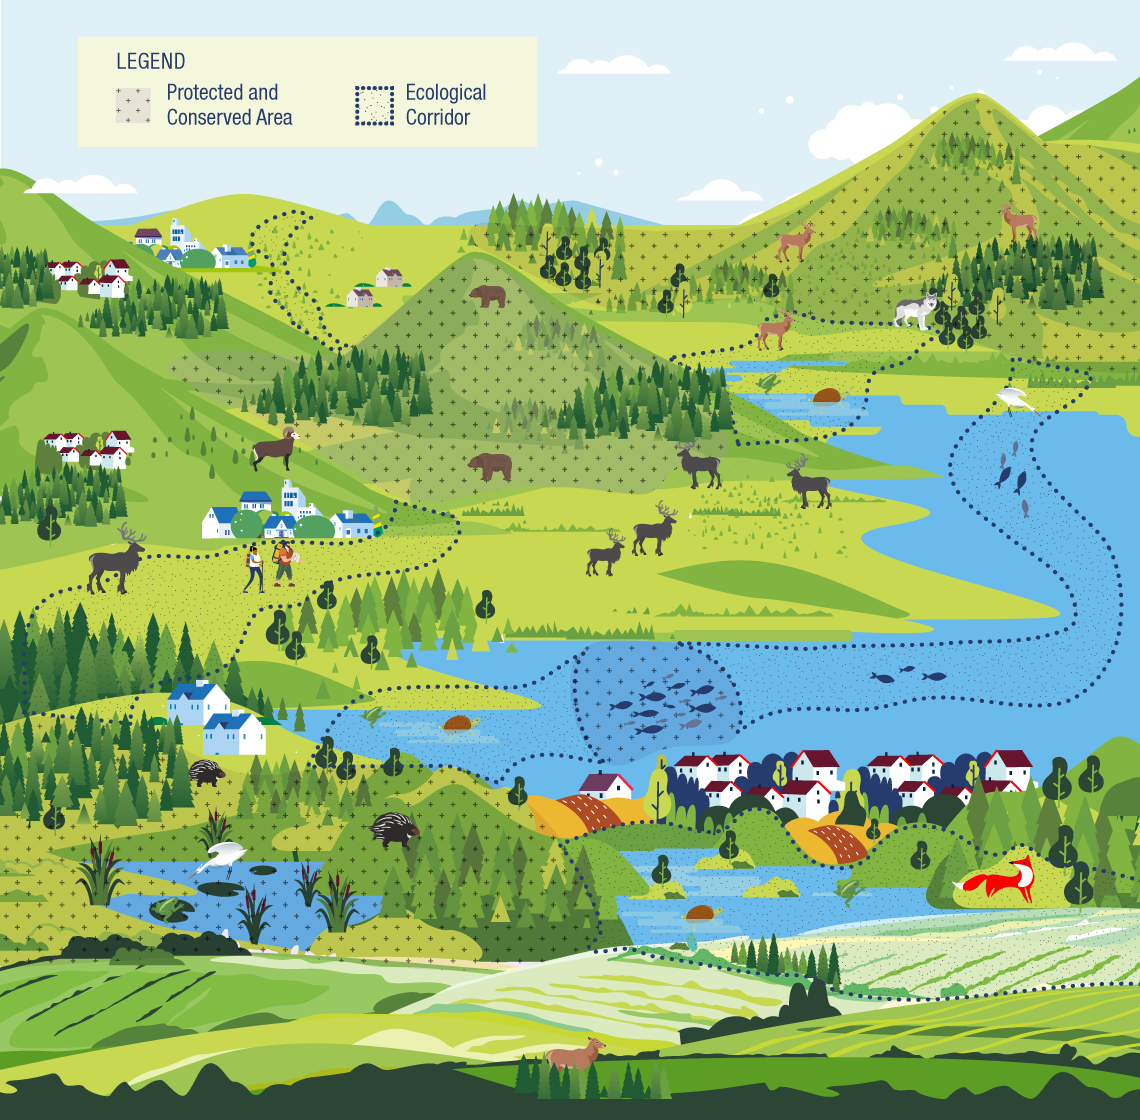 An illustration shows a landscape of mountains, scattered mixed-forest patches, and lakes under a light blue sky